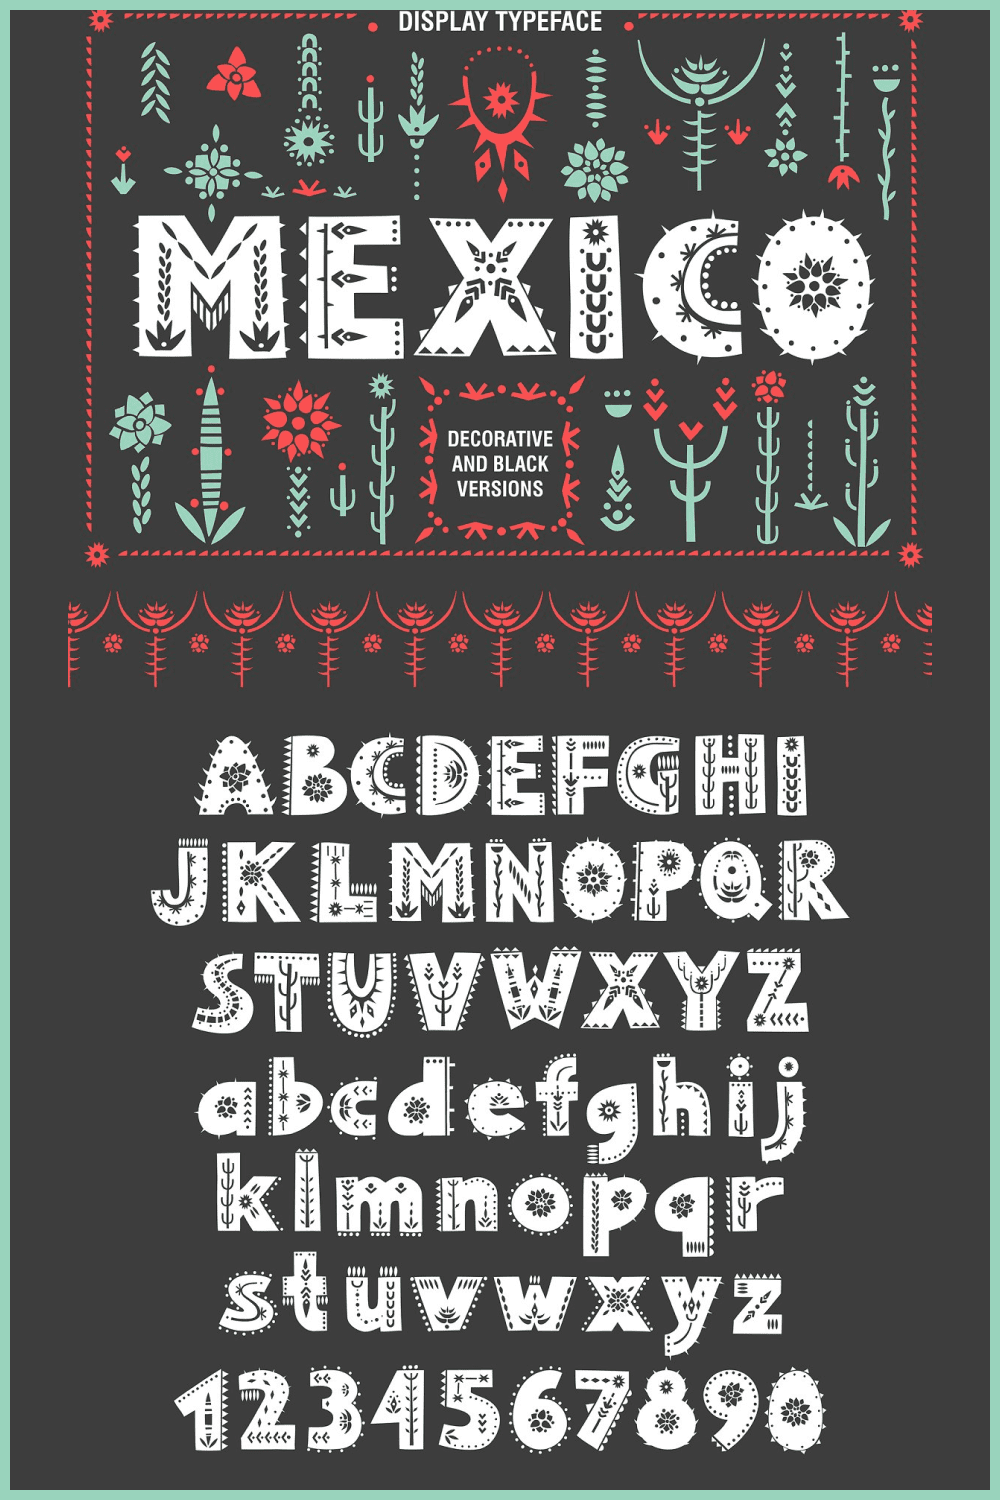 The typeface is presented in two fonts: decorative and black. Also the product includes a small clipart with stylized desert plants.